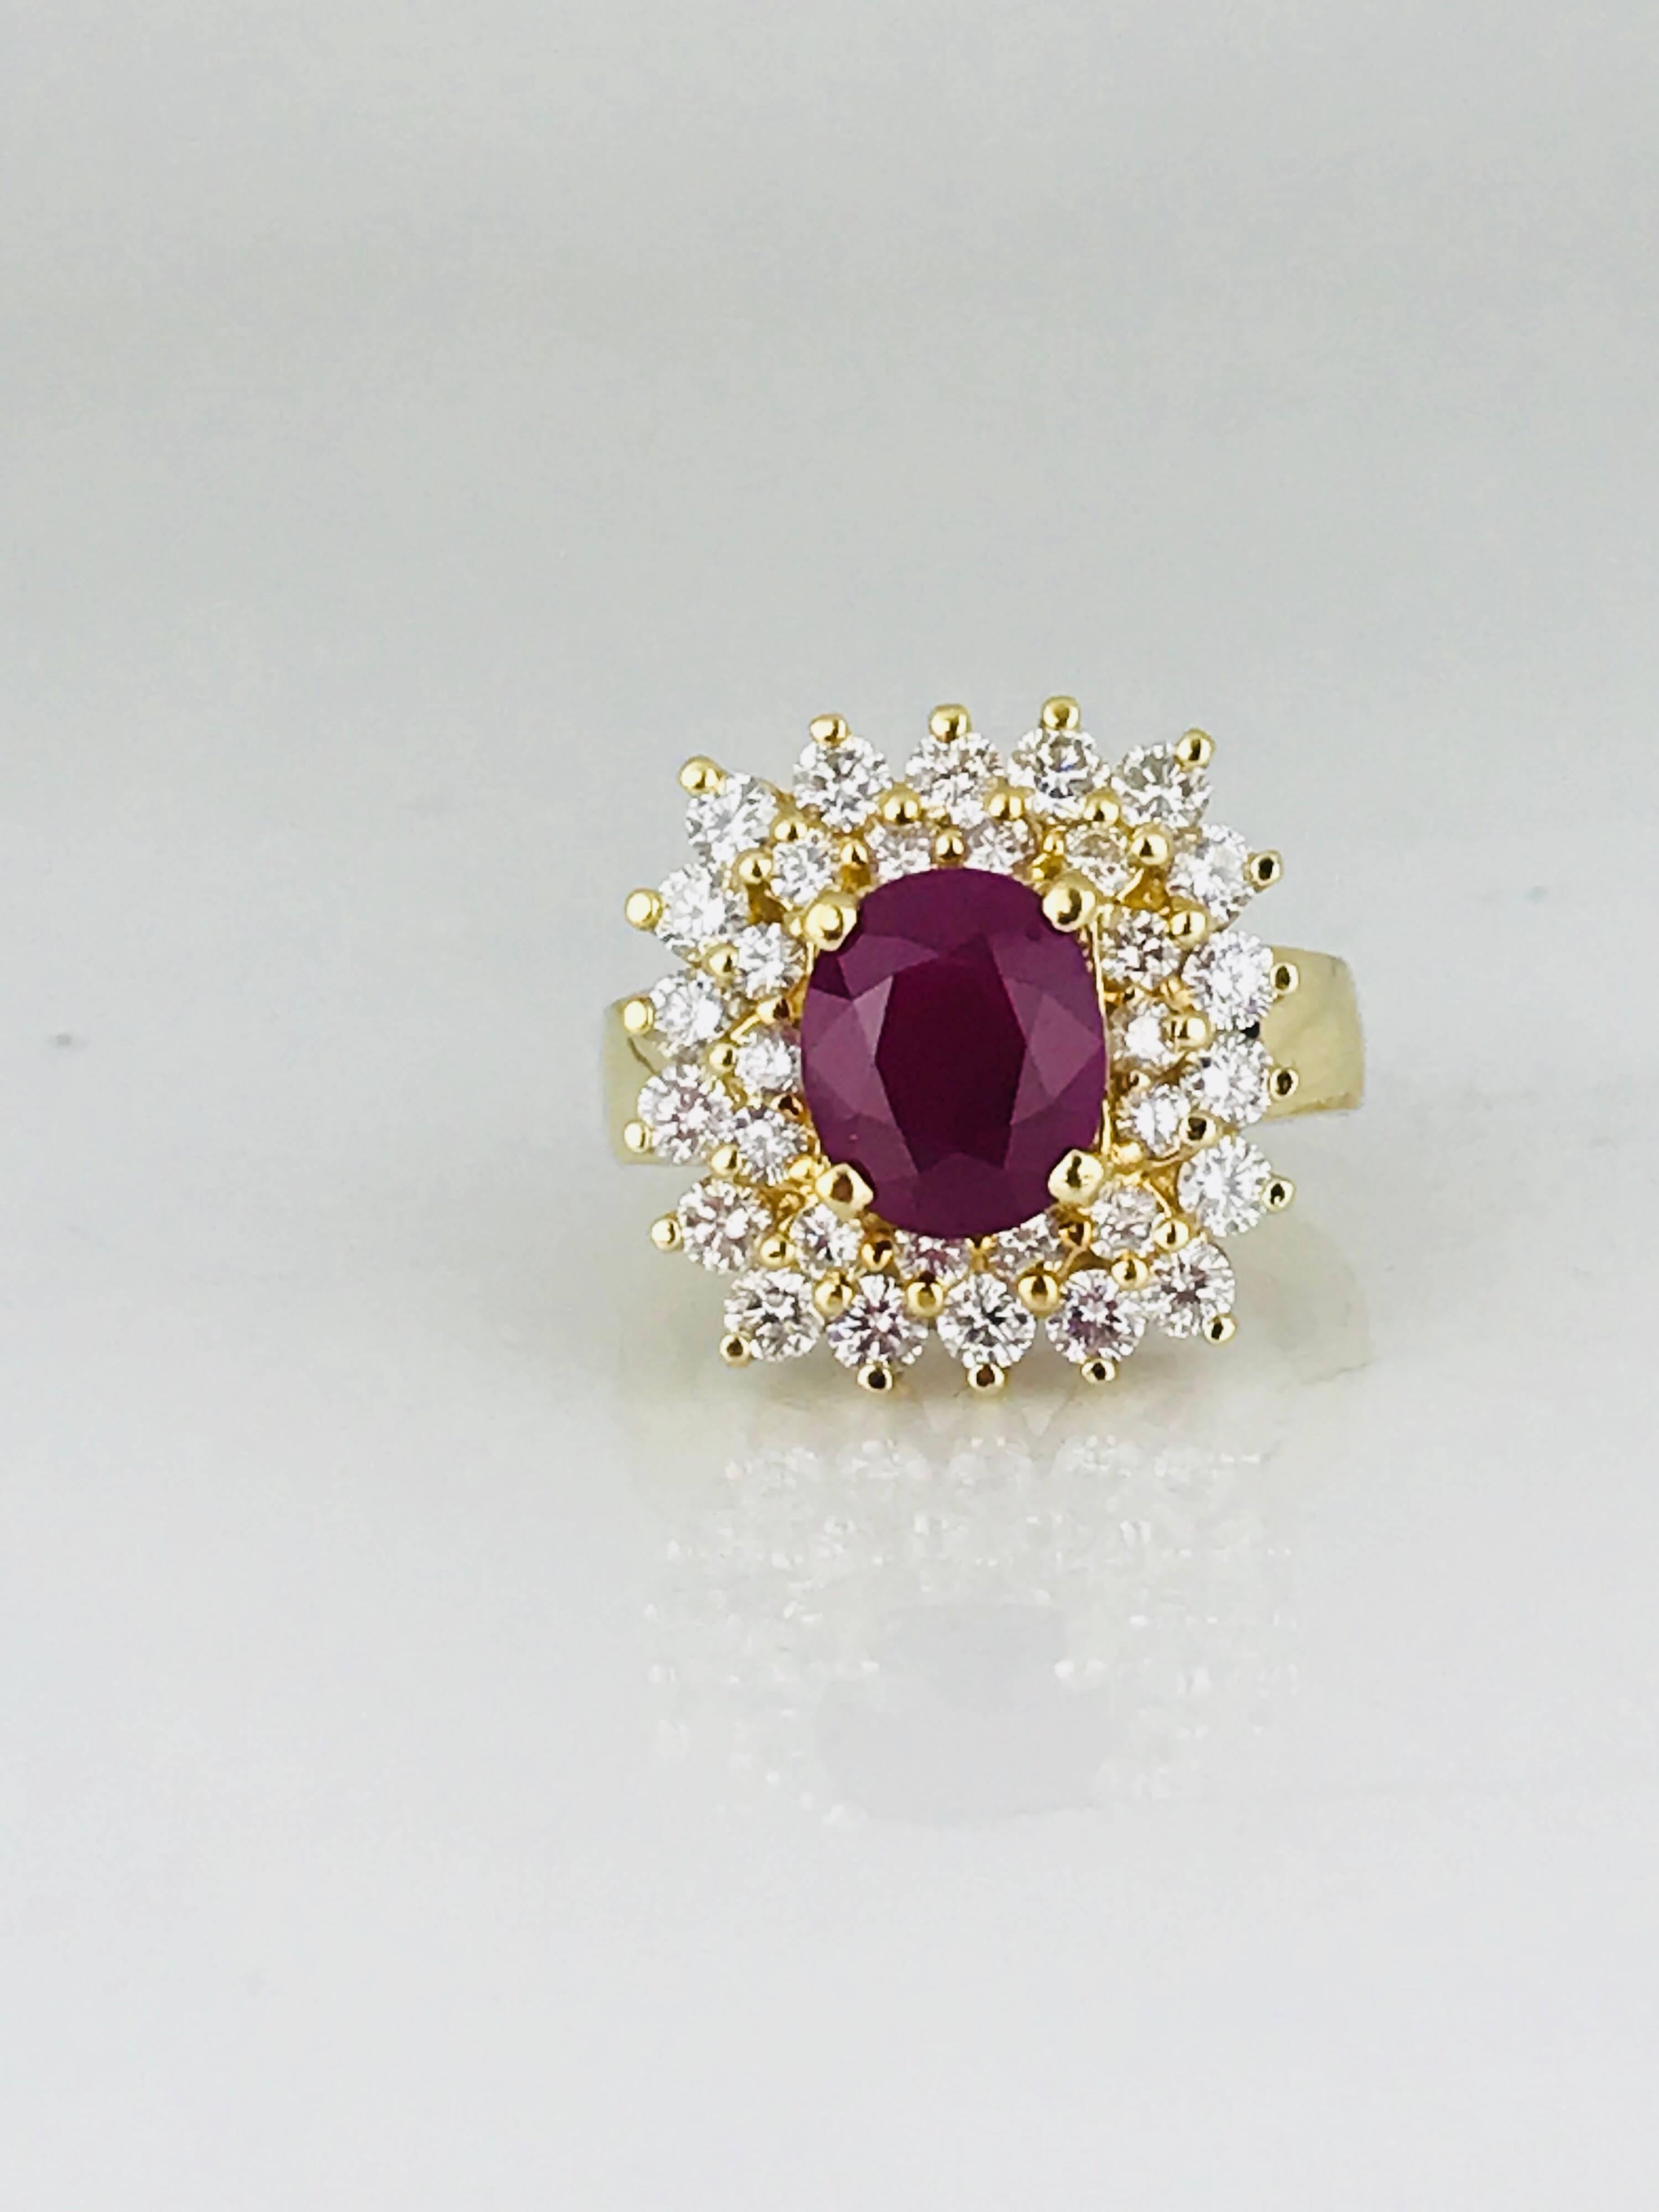 Stunning 18 karat yellow gold ring features an oval-cut, prong-set red Burmese ruby surrounded by a double halo of (32) shared-prong set round brilliant diamonds for a squared effect.

Oval Burmese ruby measures 9.52 mm x 7.46 mm x 5.79 mm and